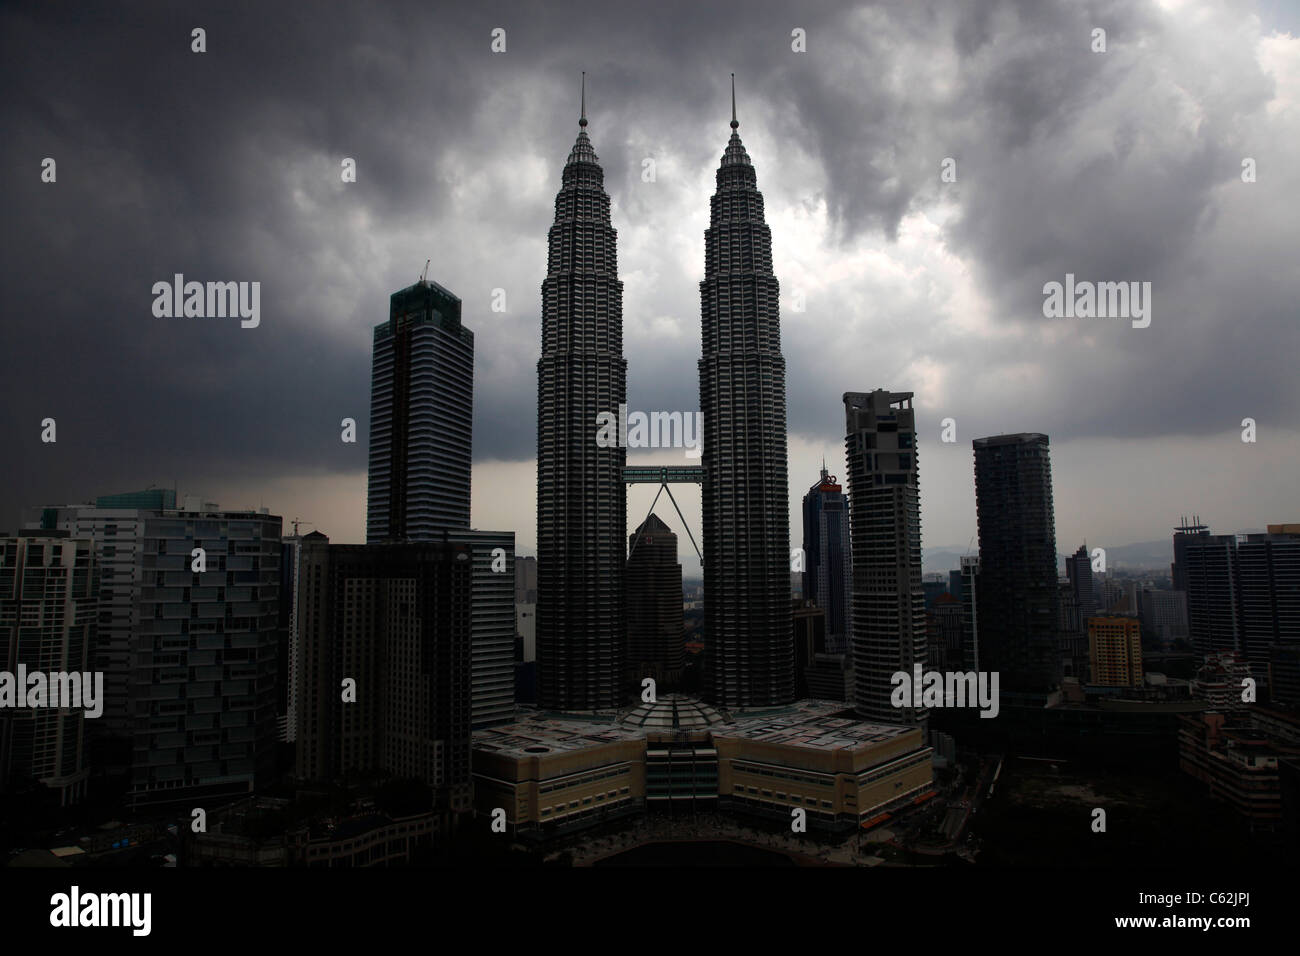 Silhouette of the Petronas Towers against a stormy sky in a storm, KLCC, Kuala Lumpur, Malaysia Stock Photo